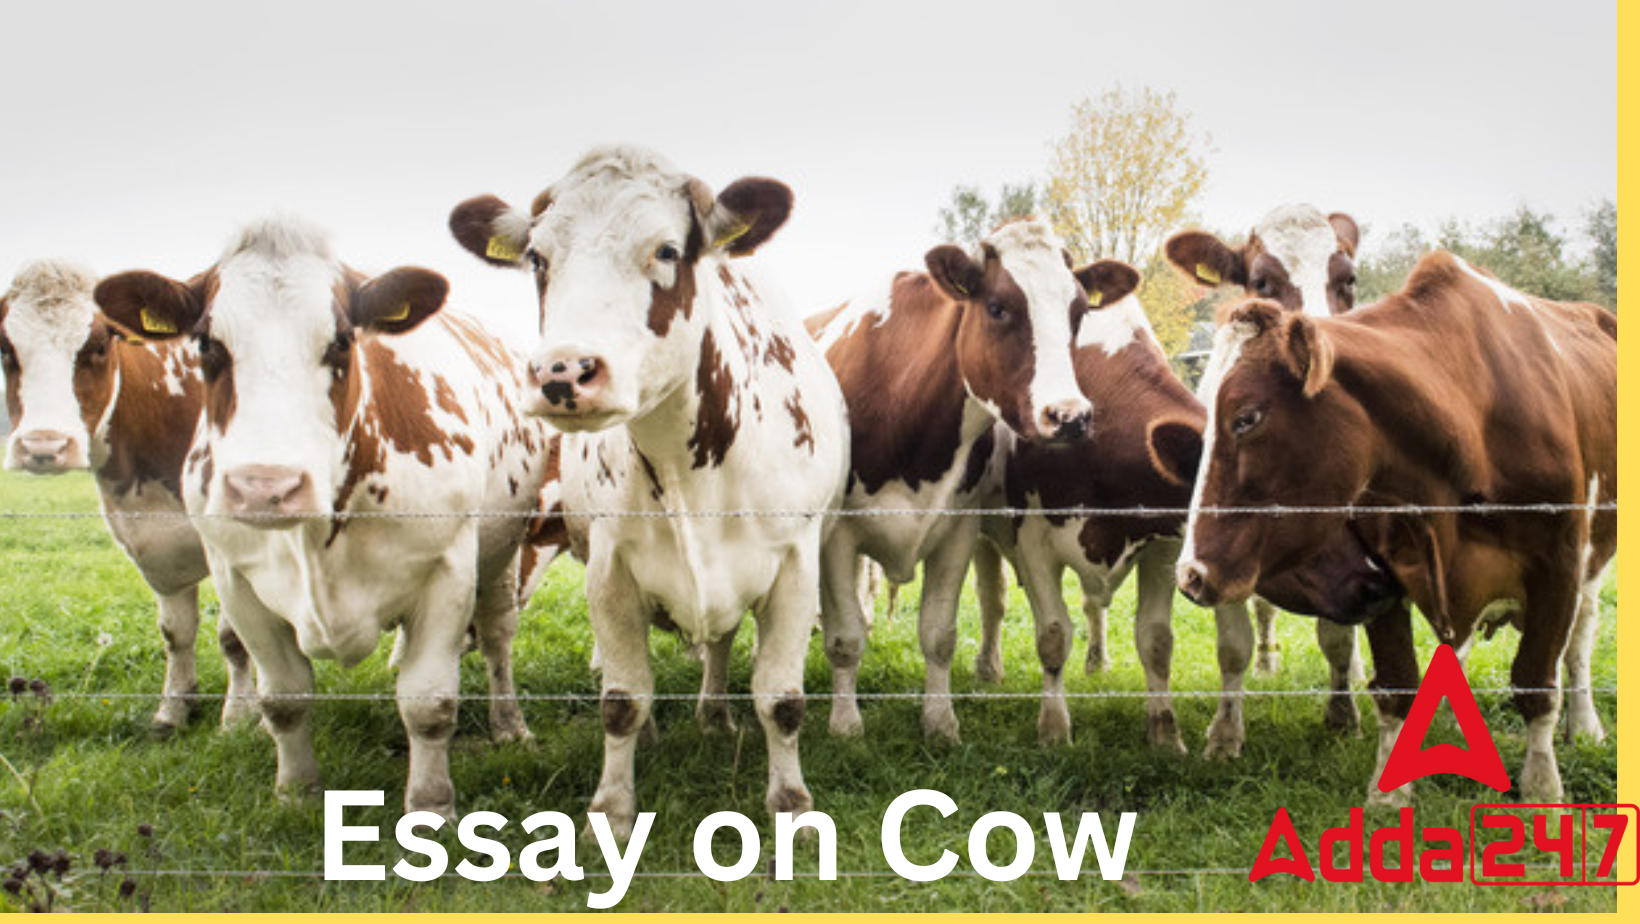 The Cow Essay 10 Lines in English and Hindi for Class 1_20.1